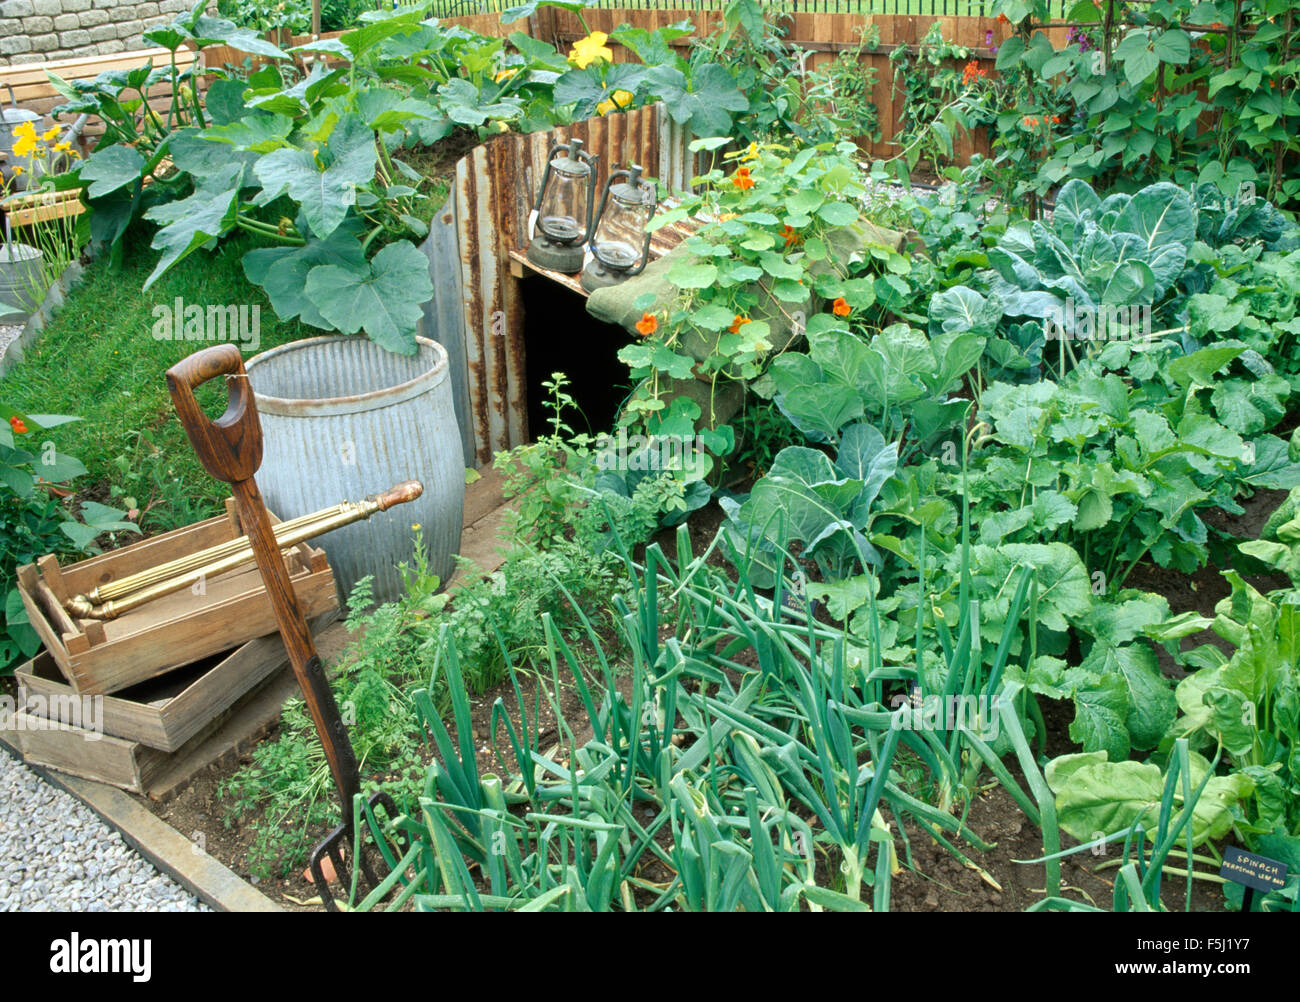 Old wooden boxes and a vintage dolly tub in a vegetable garden with onions and cabbages growing with orange nasturtiums Stock Photo